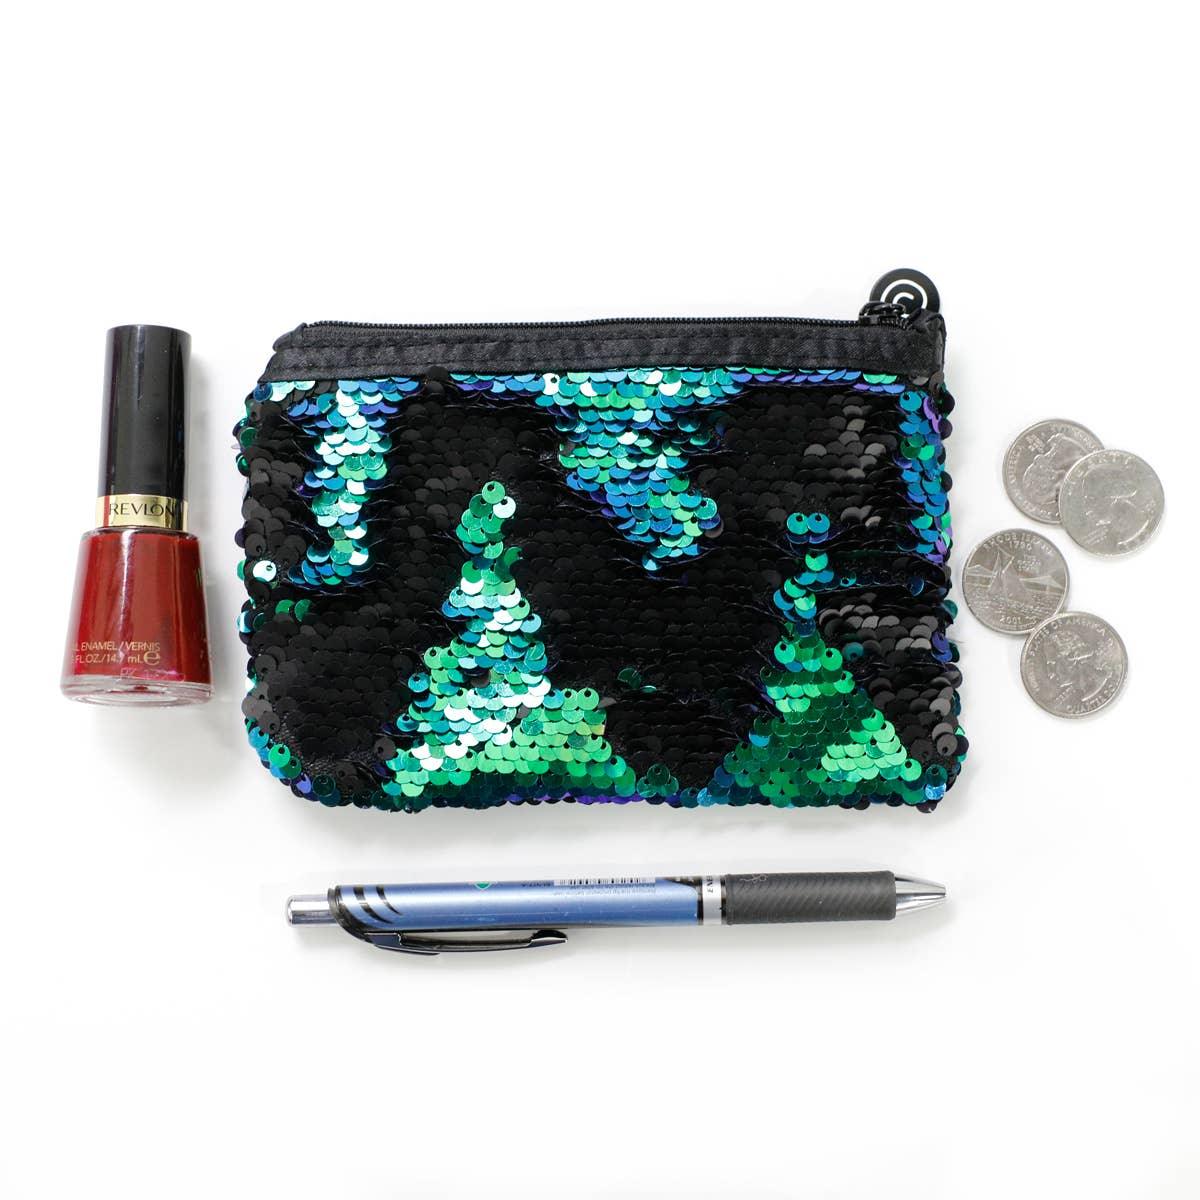 Sequin Mermaid Pouch - Blue, Green & Black - Strawberry Moon Boutique